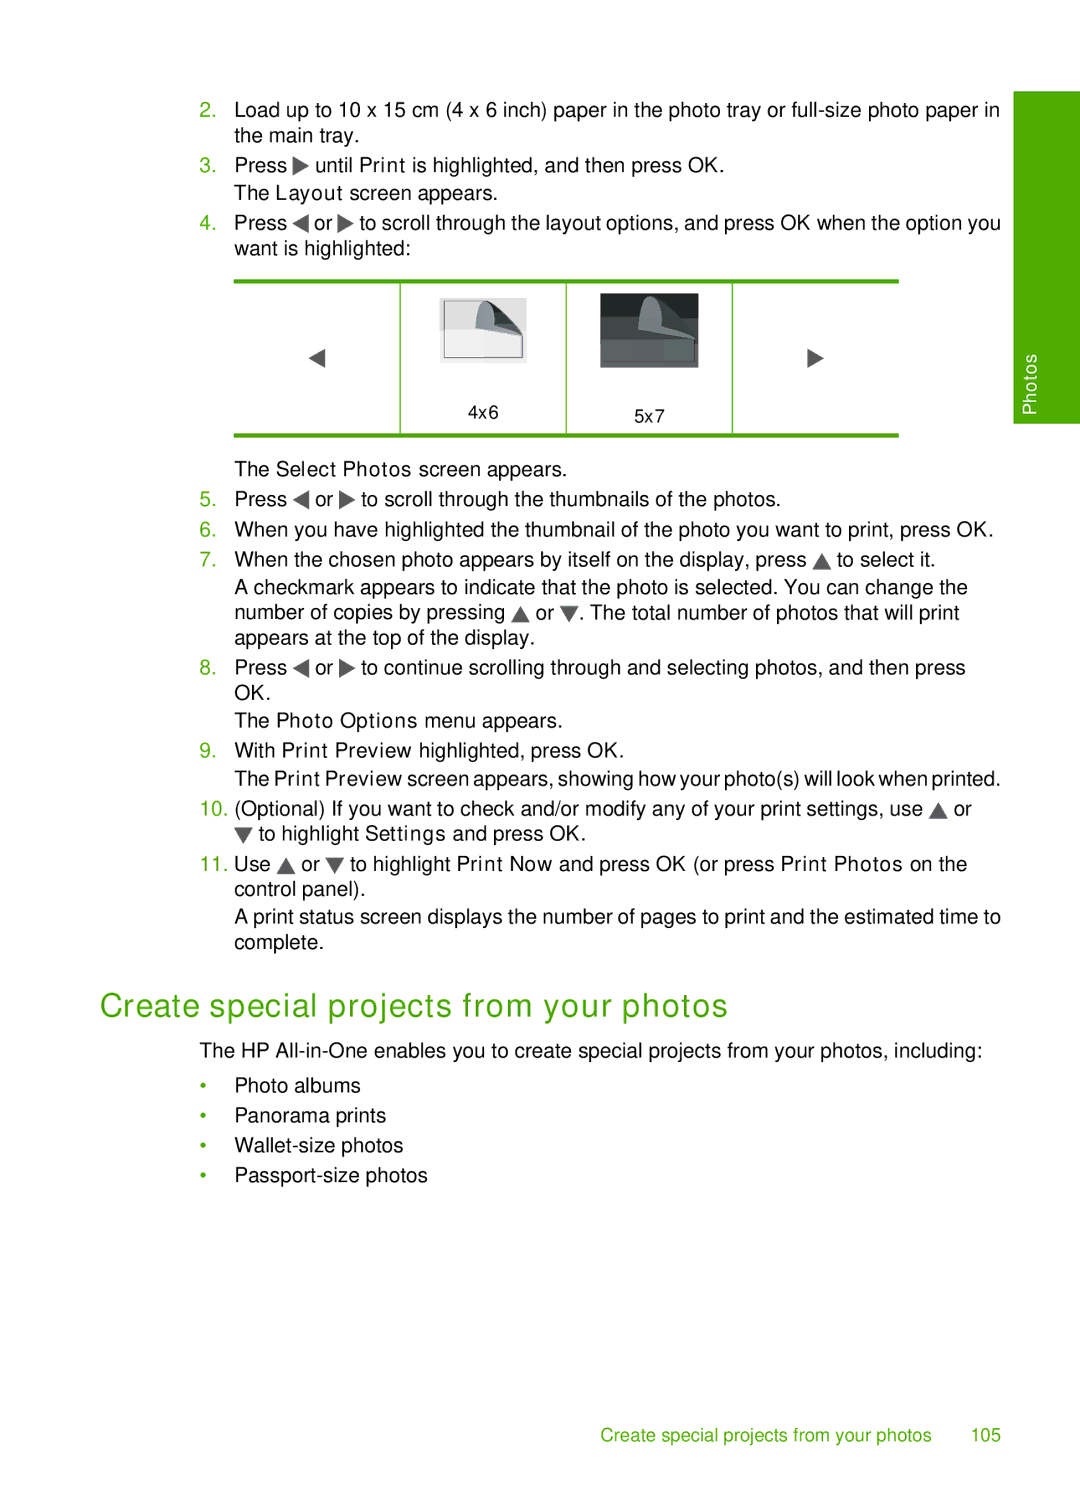 HP C7288, C7250, C7280 manual Create special projects from your photos 